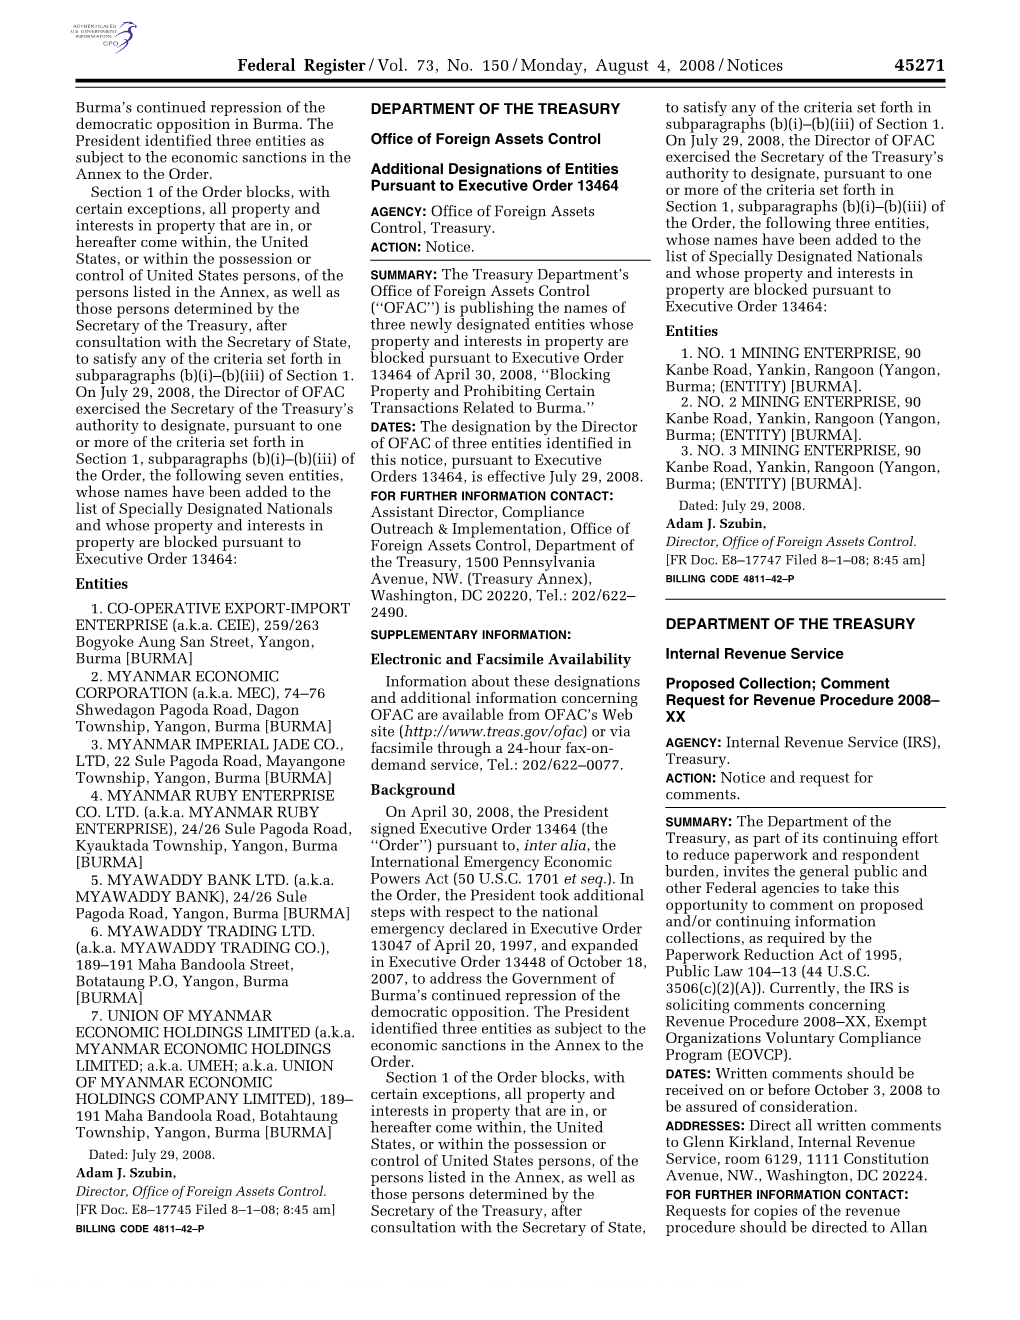 Federal Register/Vol. 73, No. 150/Monday, August 4, 2008/Notices